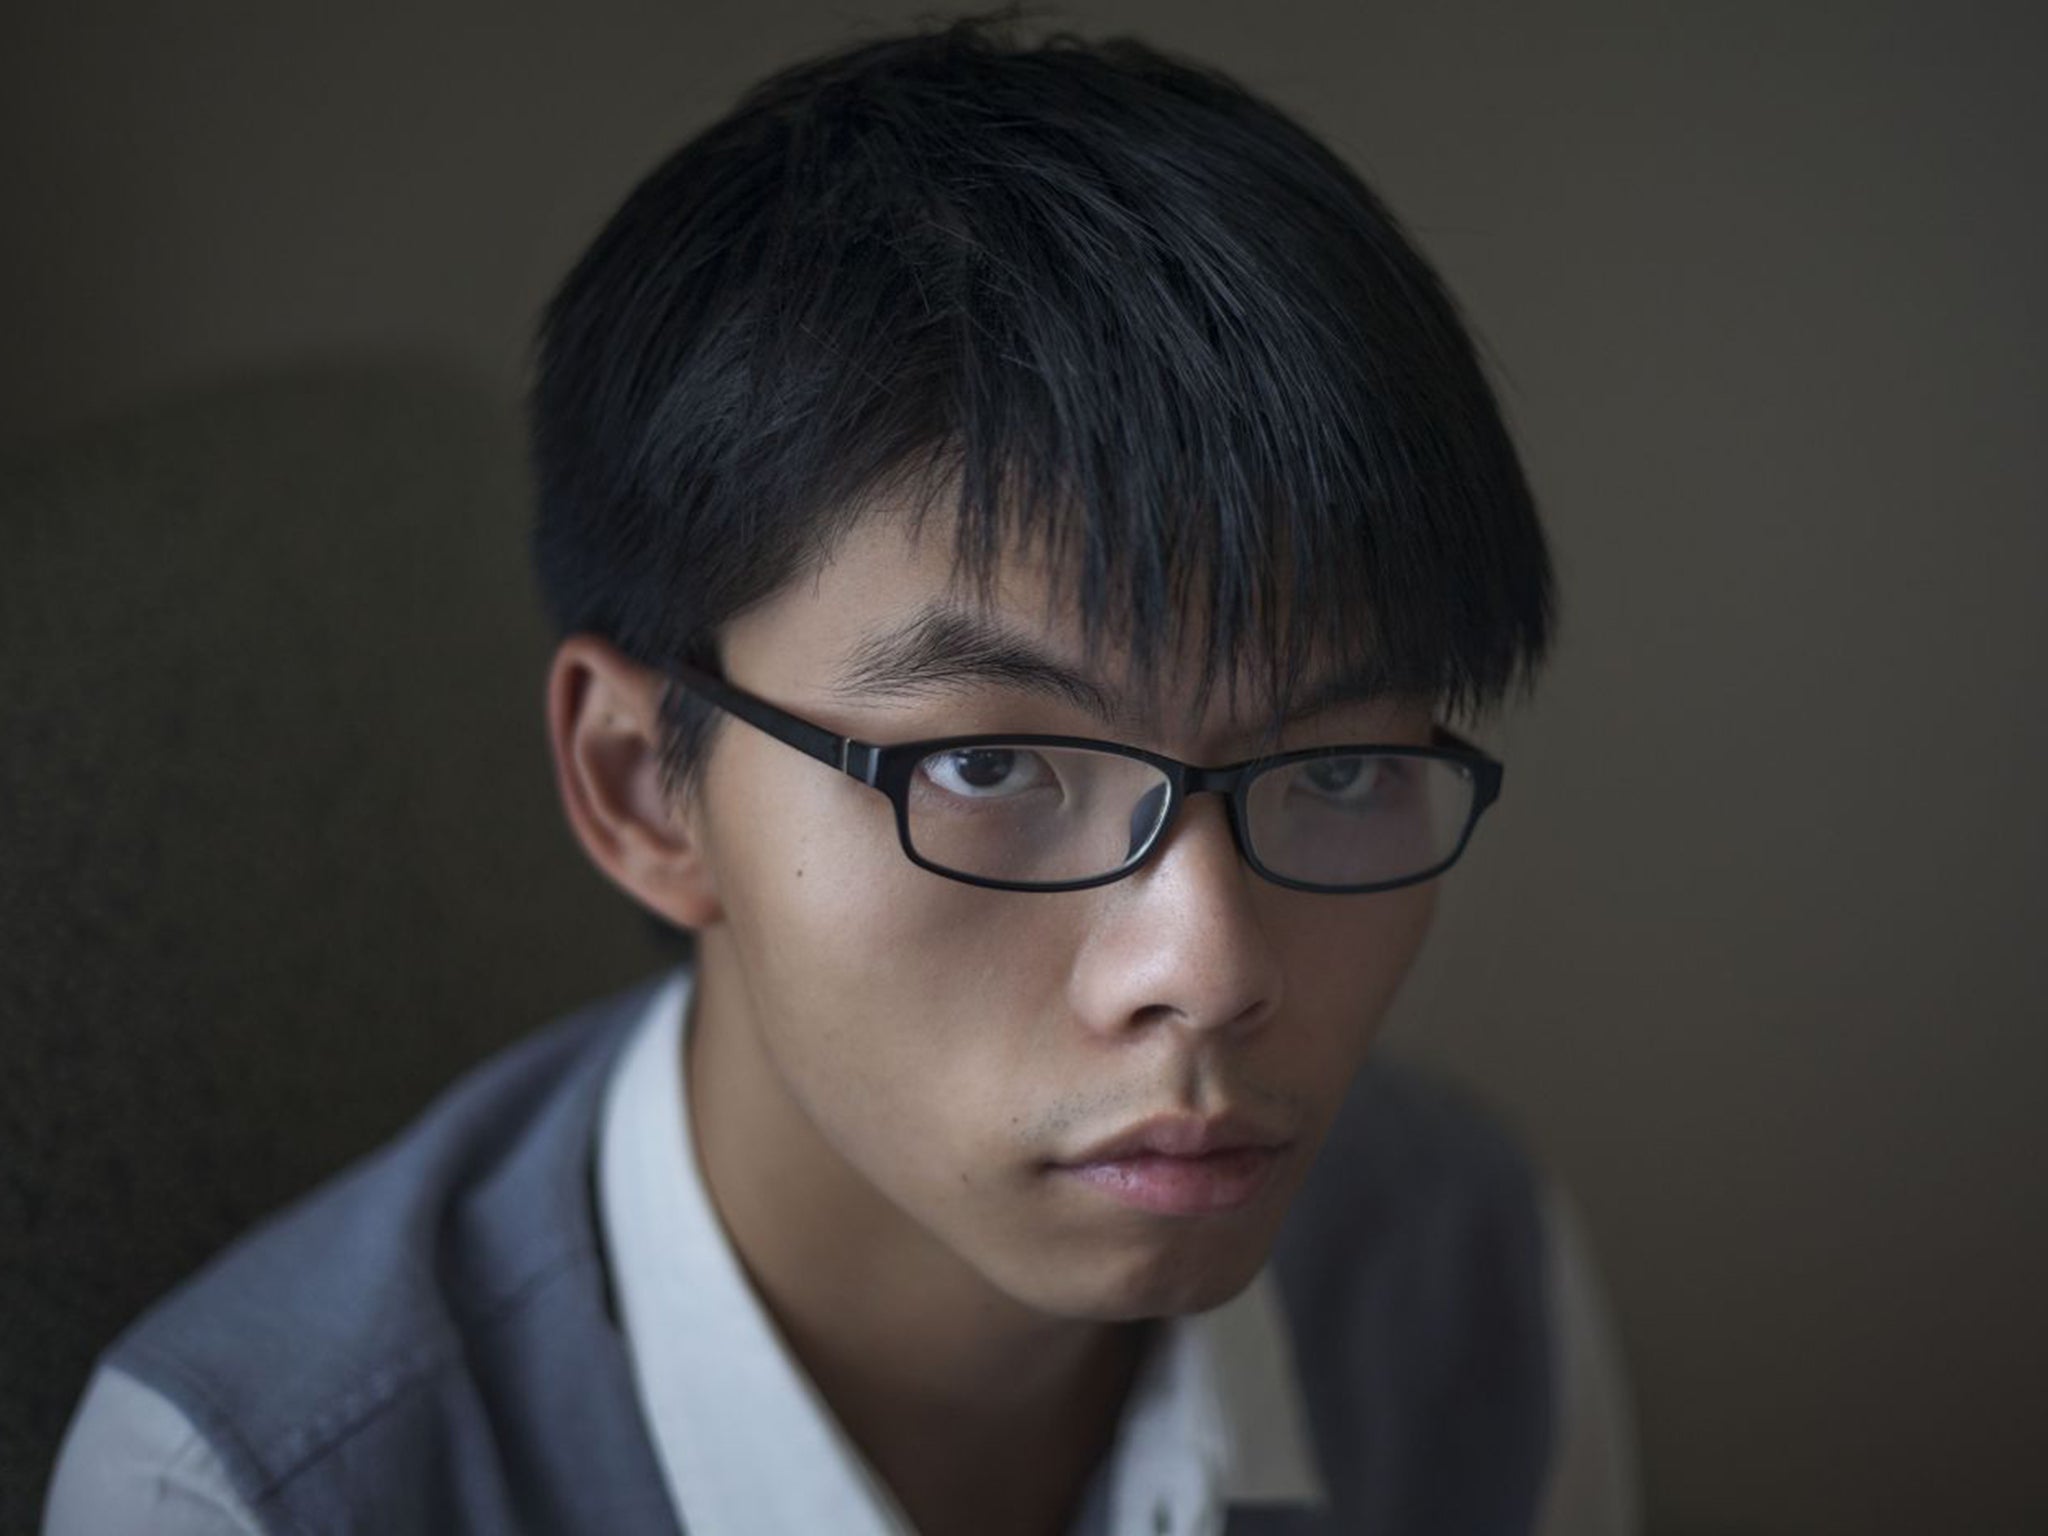 19yr old Joshua Wong faces up to five years in jail for his role spearheading the Umbrella Revolution in Hong Kong